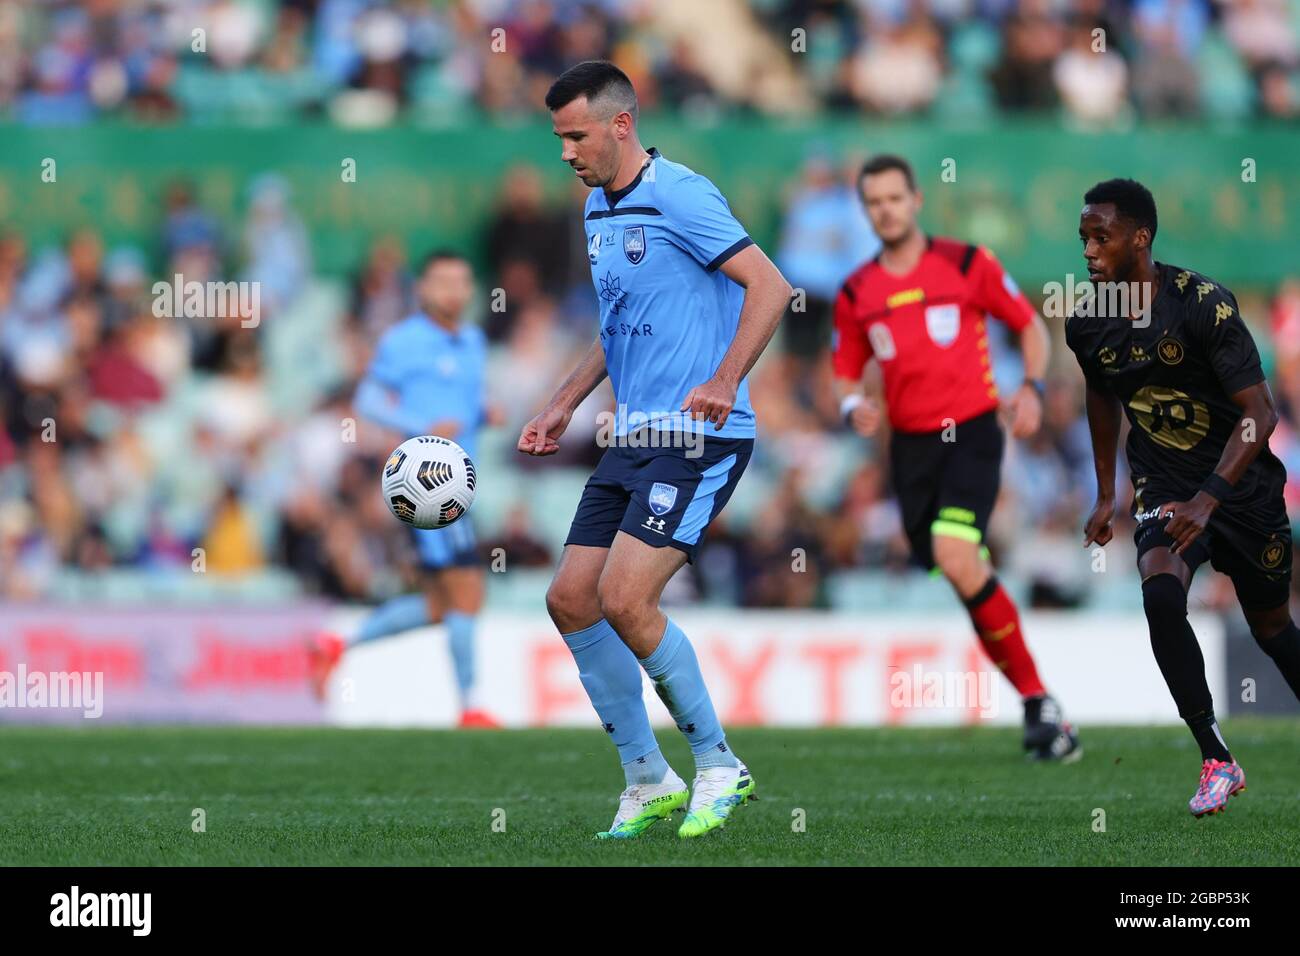 SYDNEY, AUSTRALIA - MAY 23: Ryan Mcgowan of Sydney FC controls the ball during the A-League soccer match between Sydney FC and Western Sydney Wanderers FC on May 23, 2021 at the Sydney Cricket Ground in Sydney, Australia. Credit: Pete Dovgan/Speed Media/Alamy Live News Stock Photo